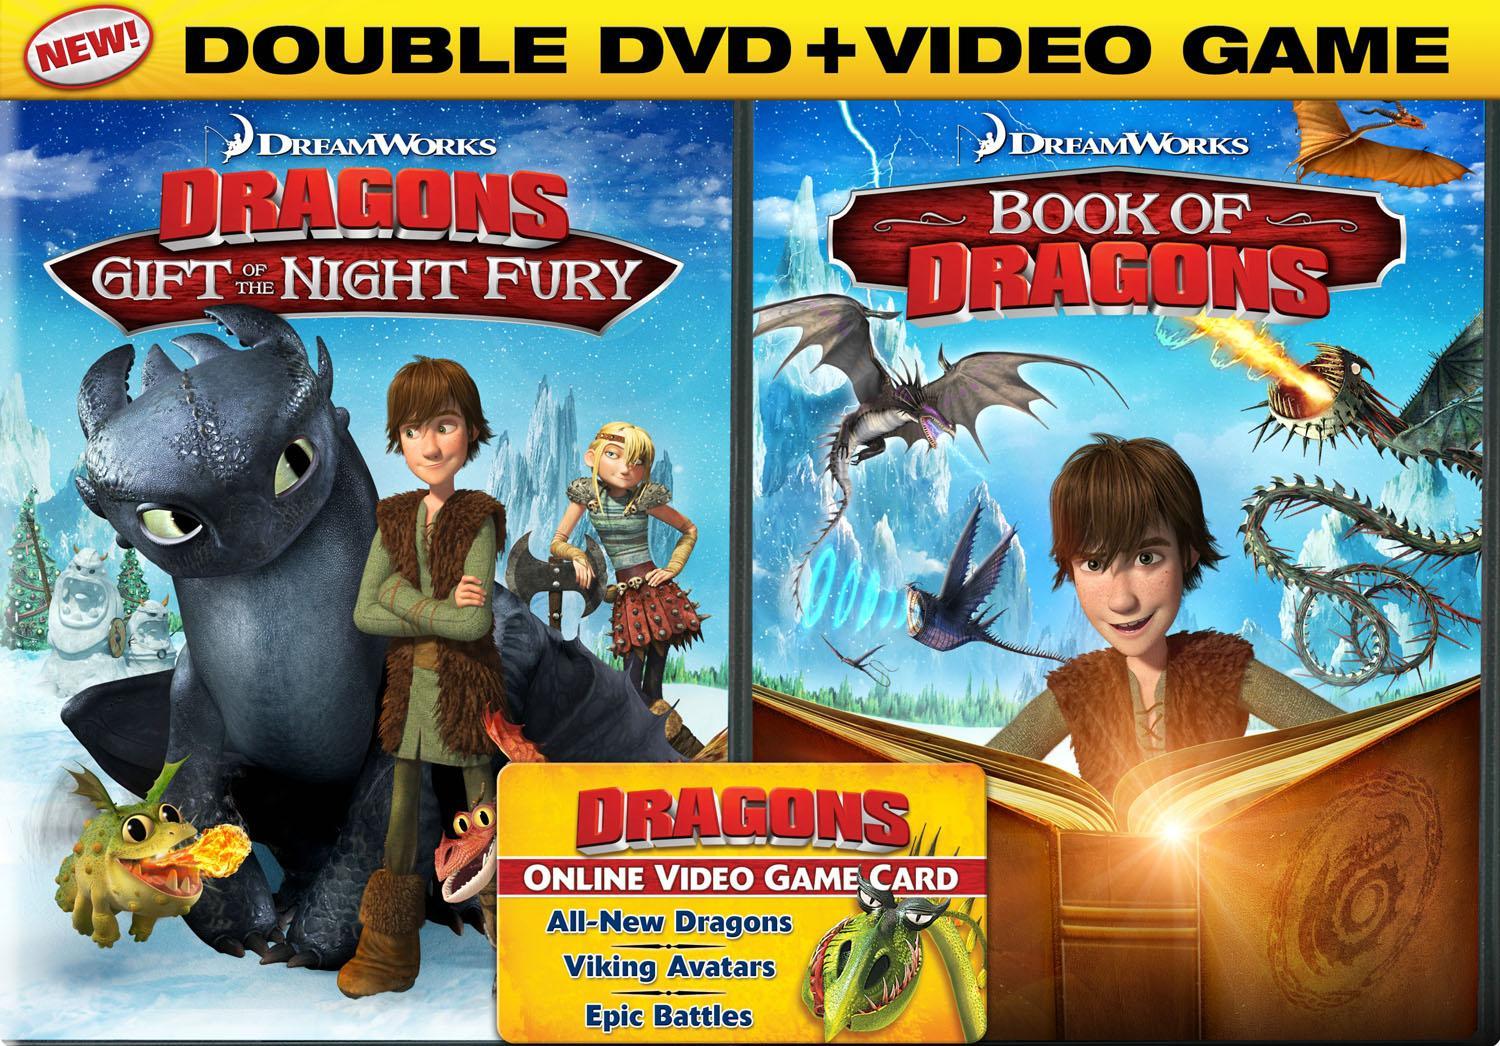 Image gallery for How to Train Your Dragon: Book of Dragons (S